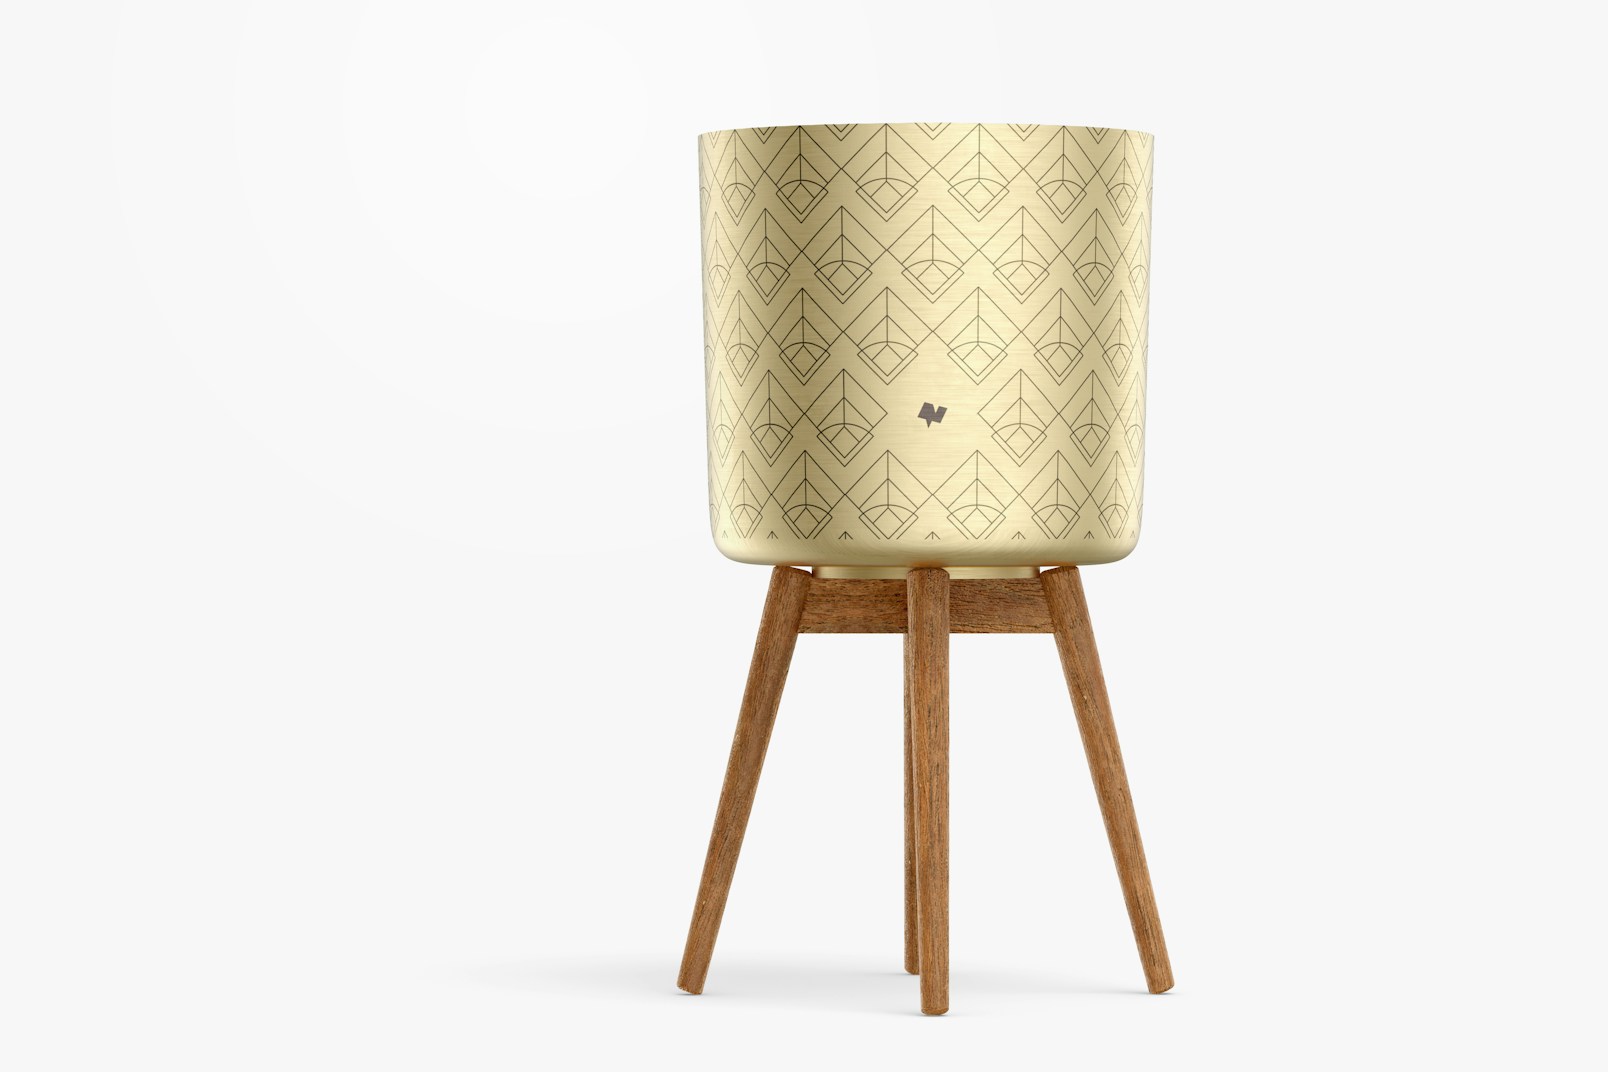 Brass Planter with Stand Mockup